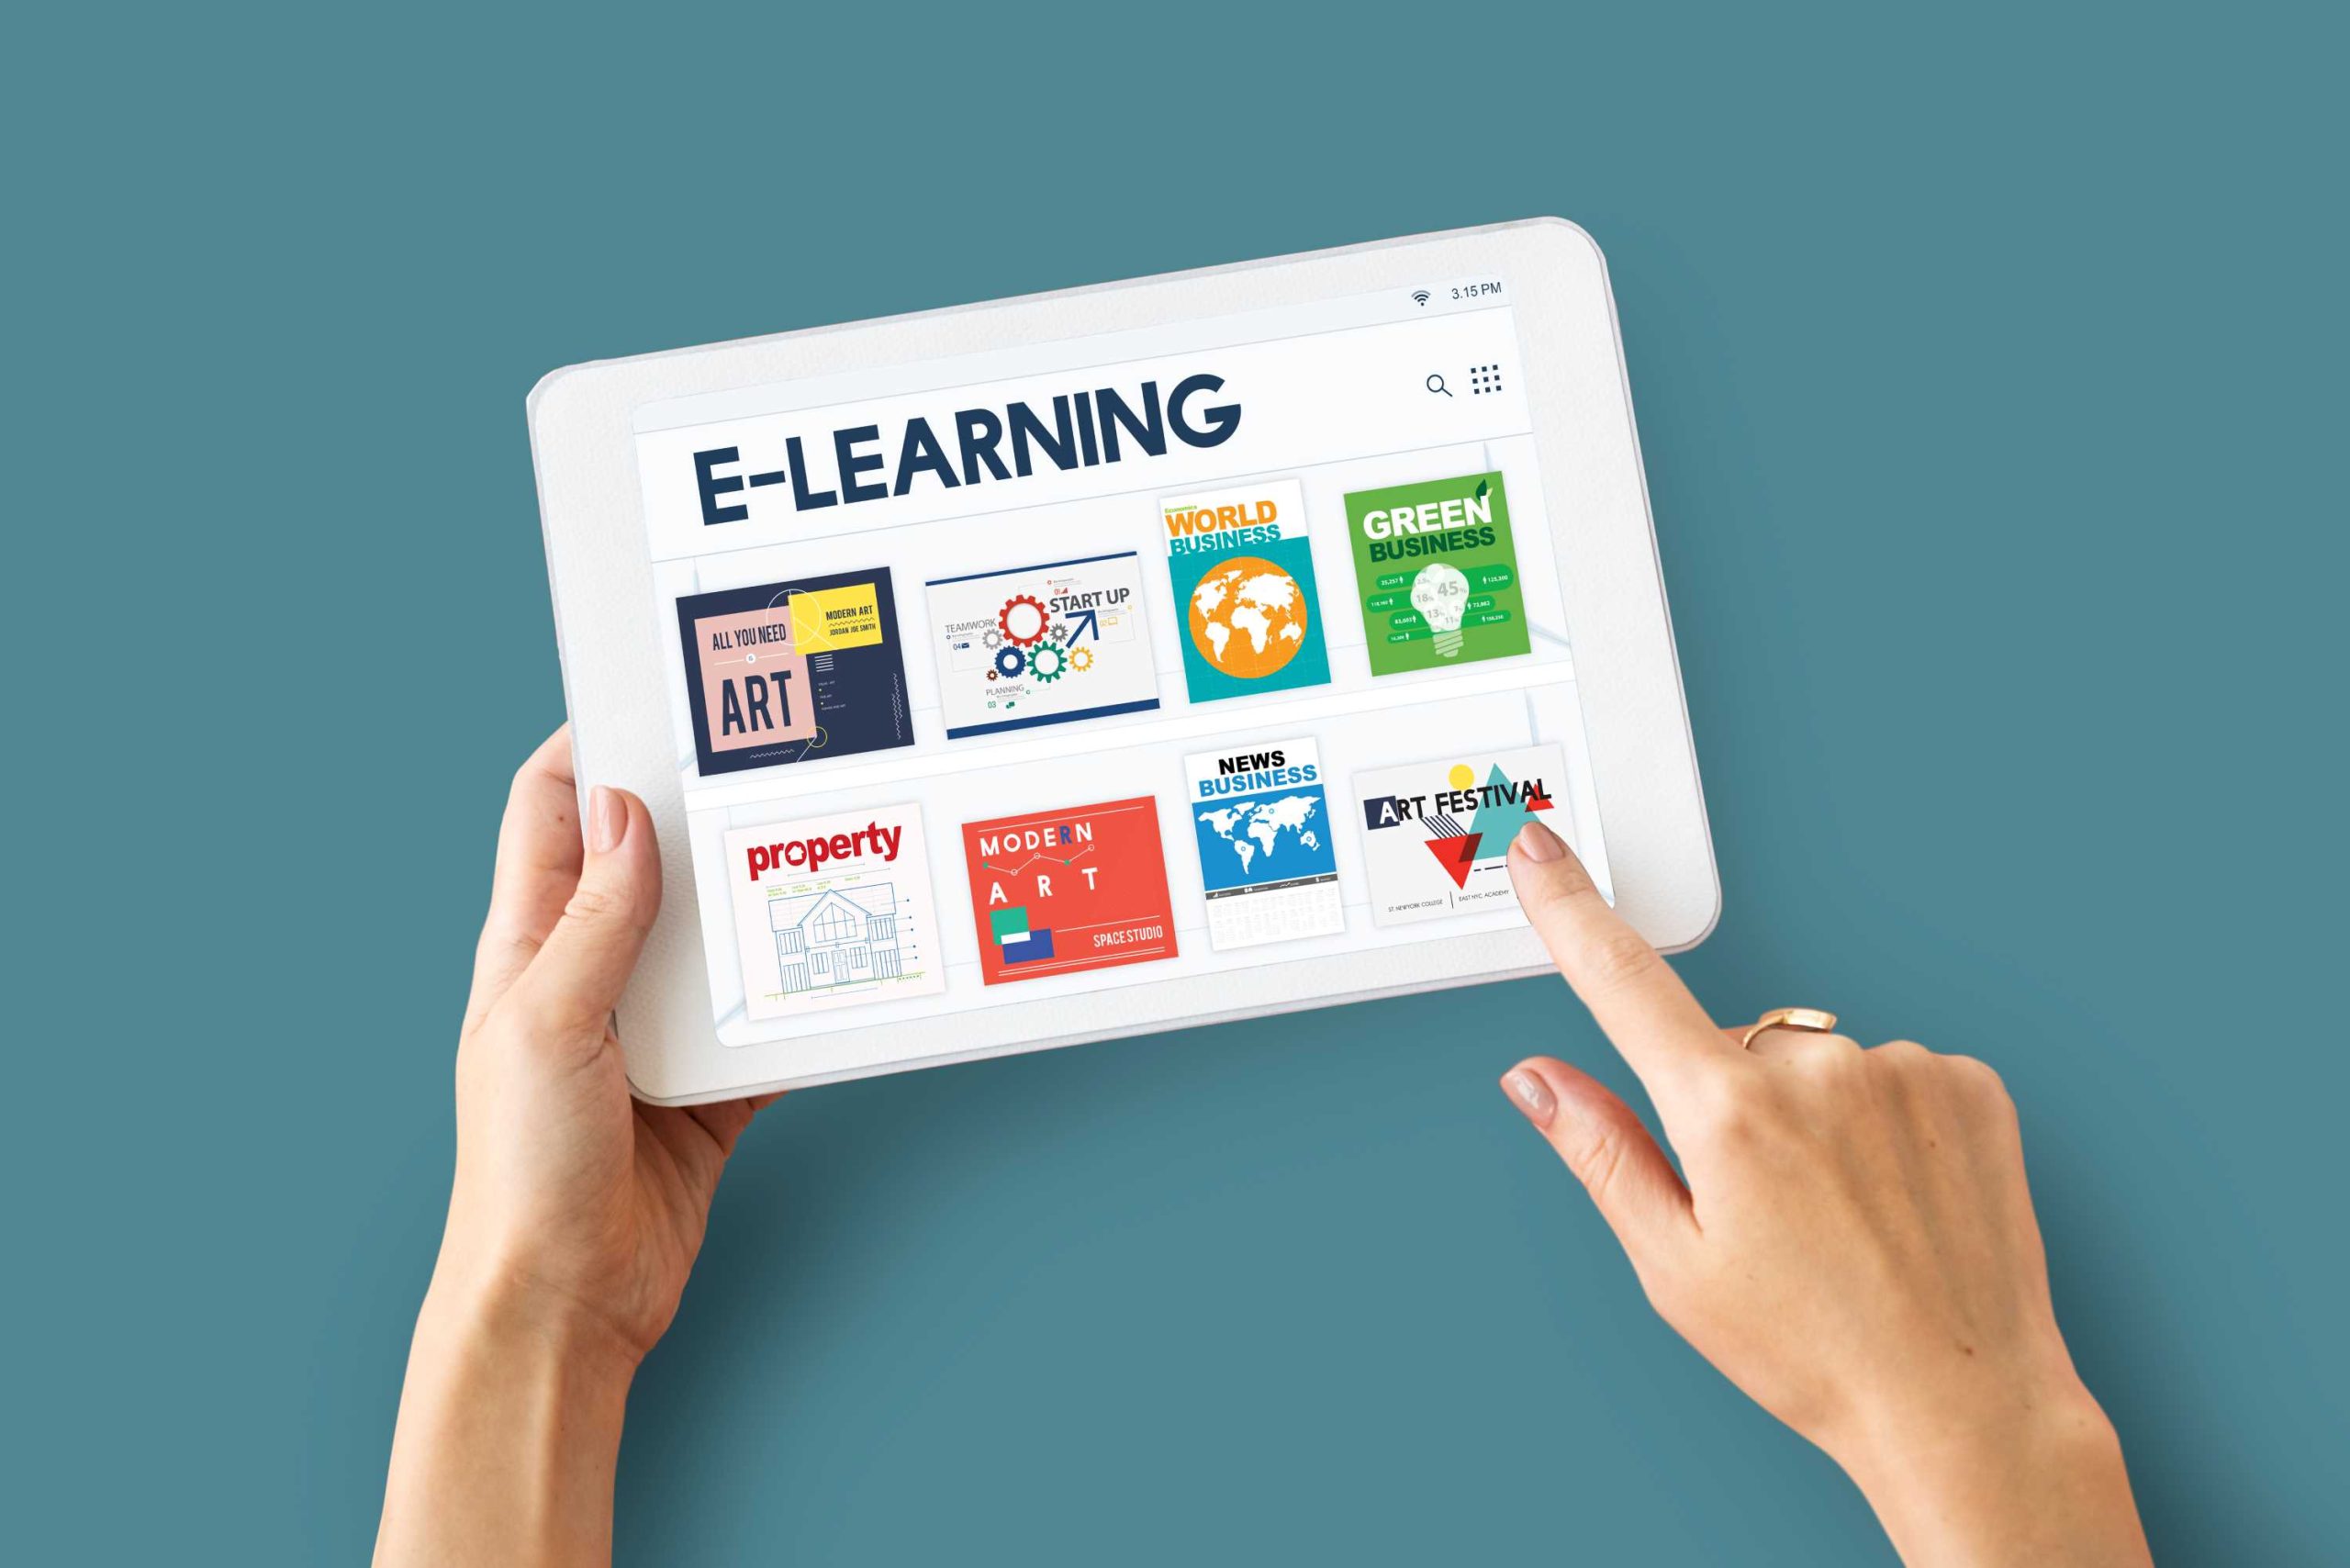 Elearning Content Library being shown on a tablet device